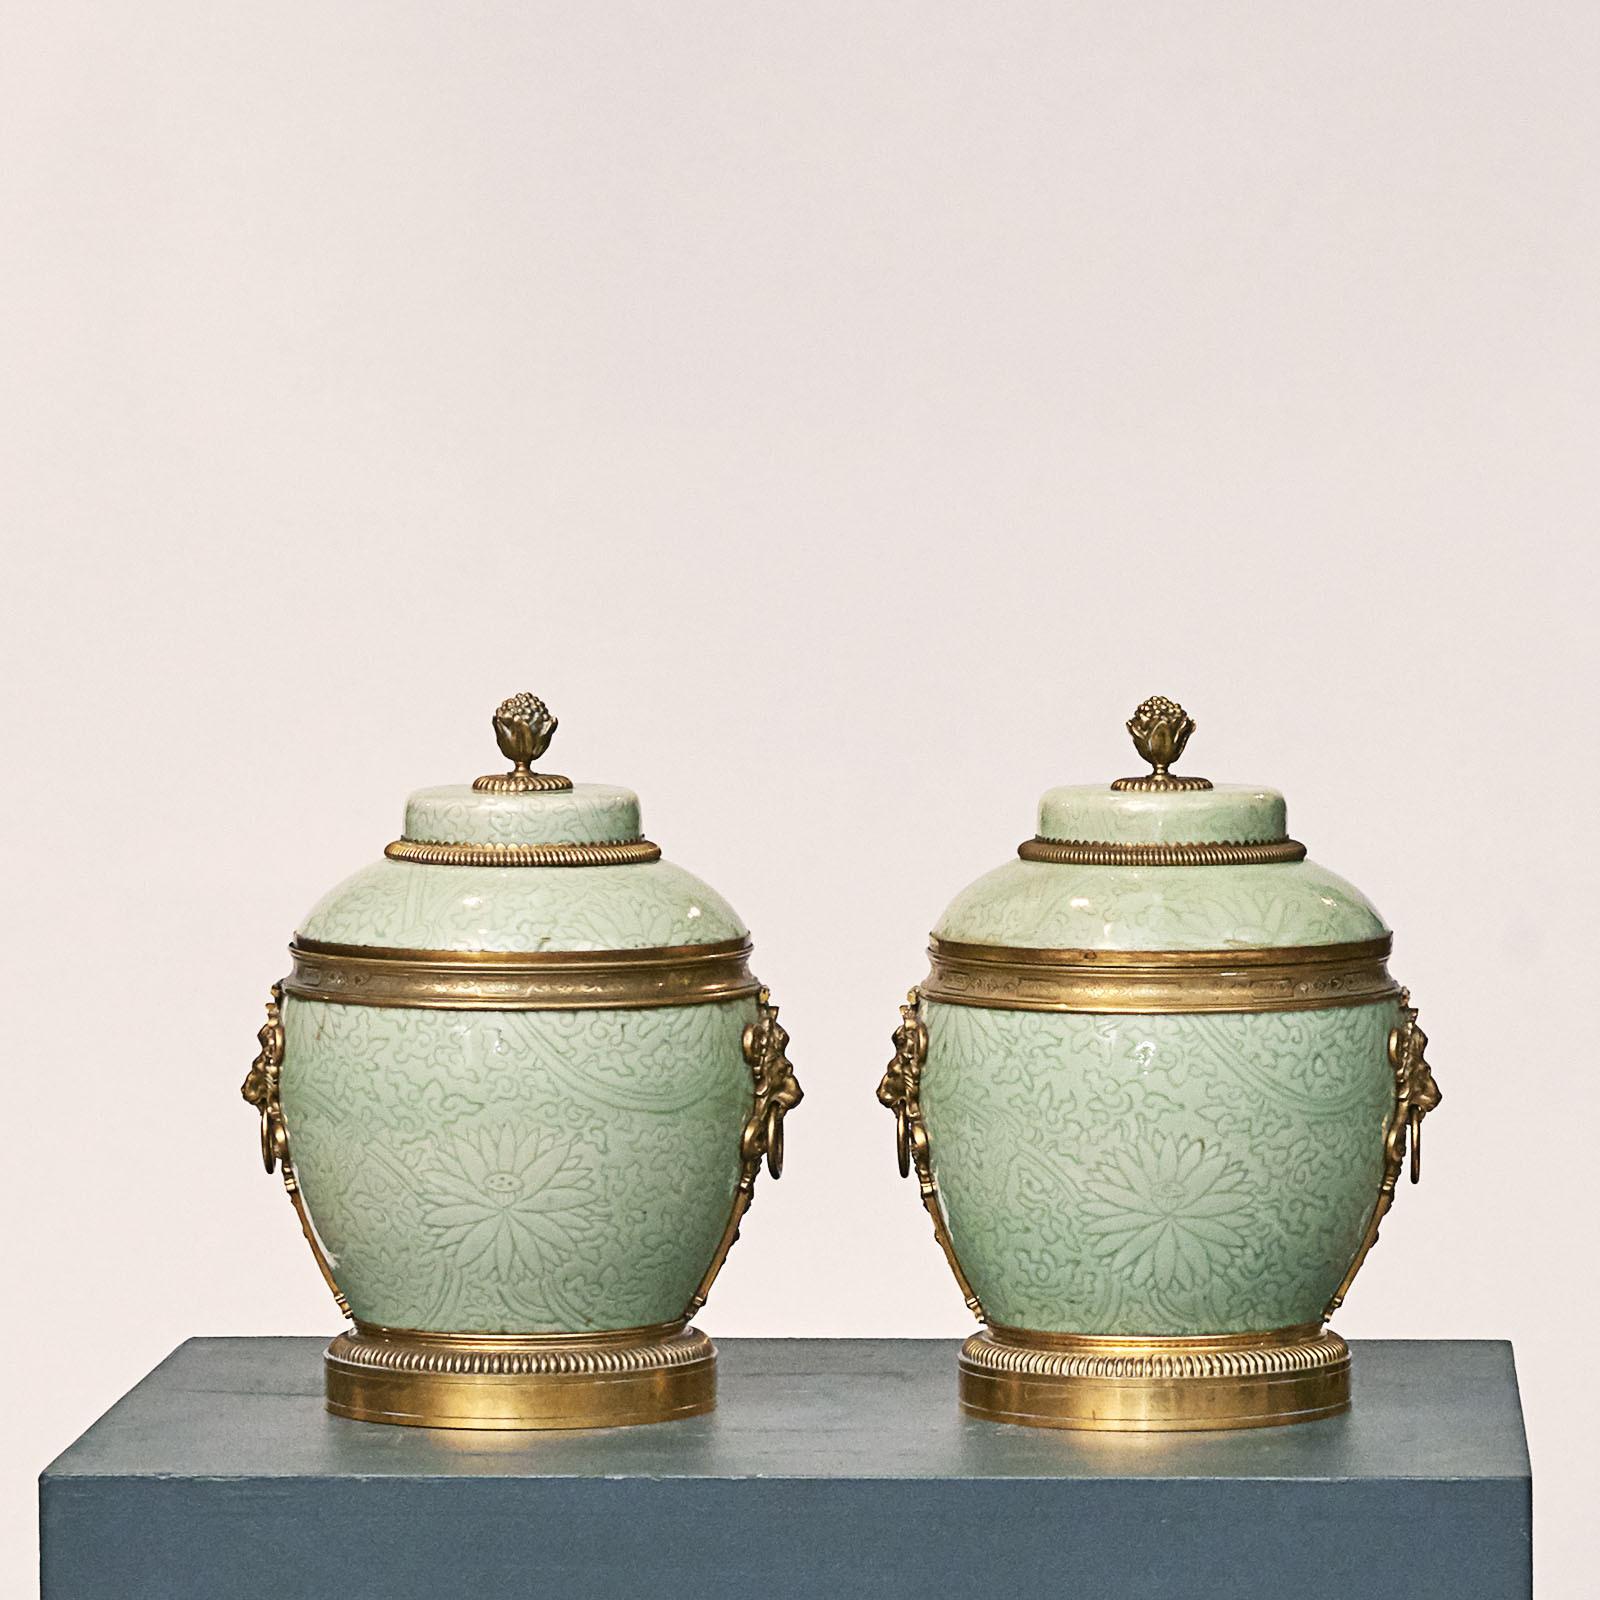 A pair of Regence gilt-bronze mounted celadon lidded vases, Qing dynasty, Kangxi (1662-1722), in the manner of Yuan dynasty, and circa 1720.
Each turquoise colored lidded vase / urn is made of Chinese glazed porcelain and features an Ormolu knob on